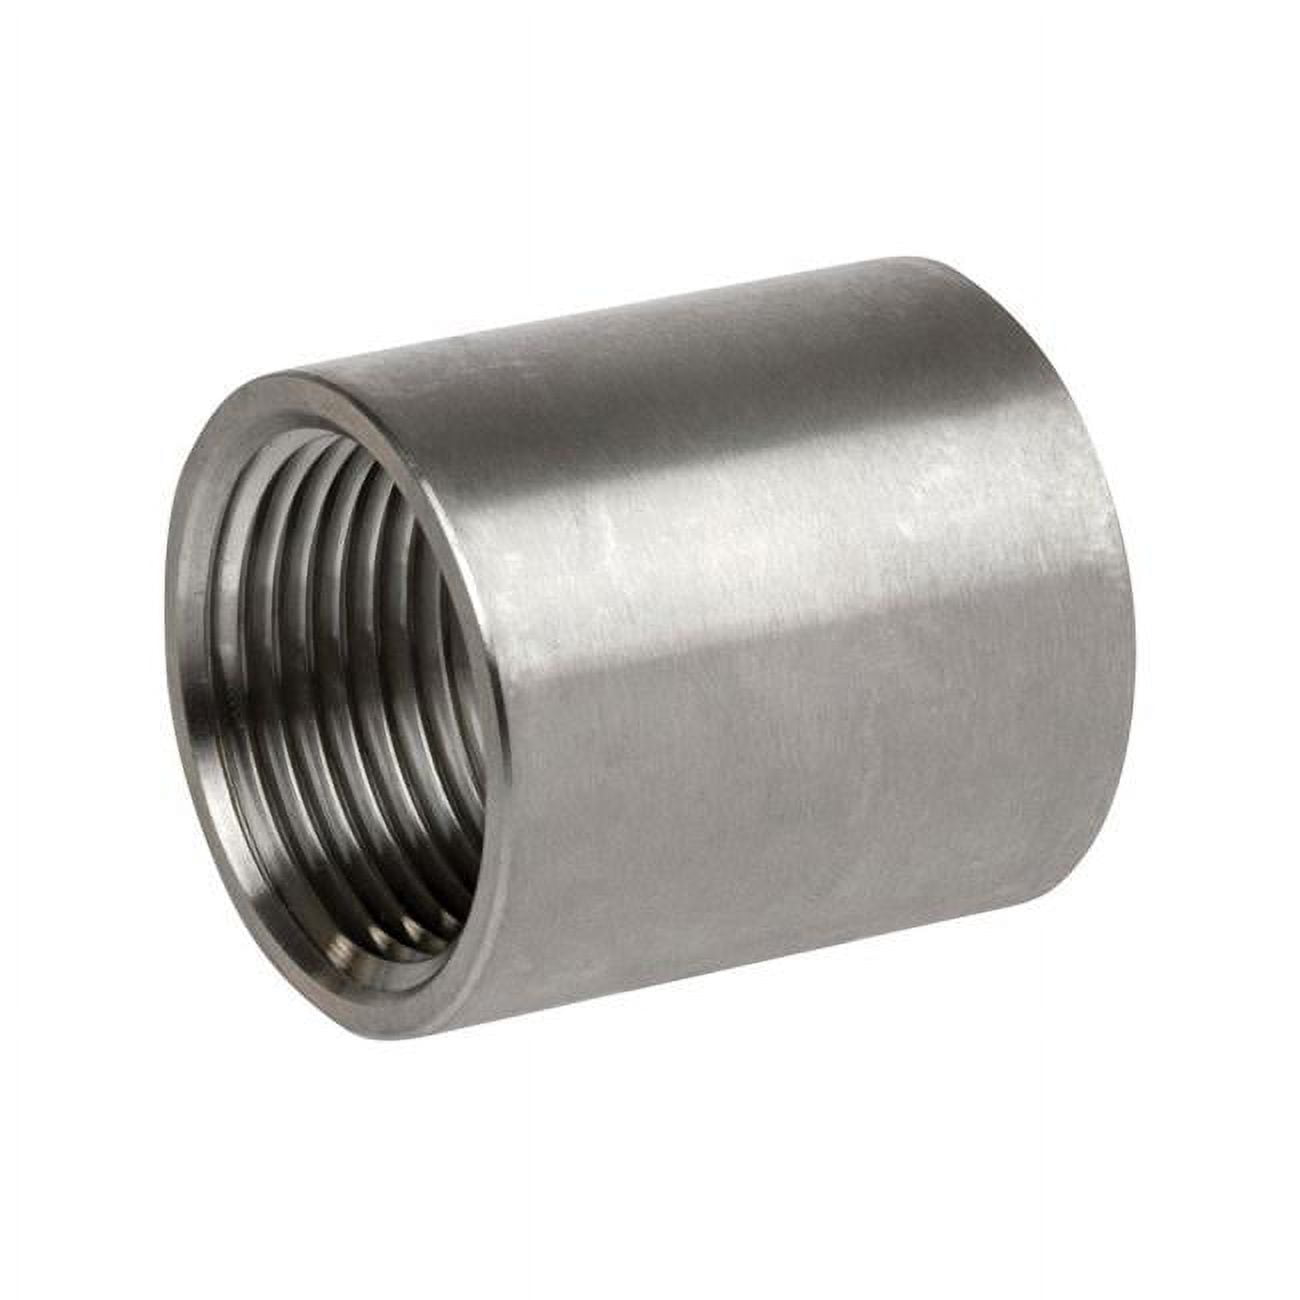 4810362 1 In. Thread Stainless Steel Coupling